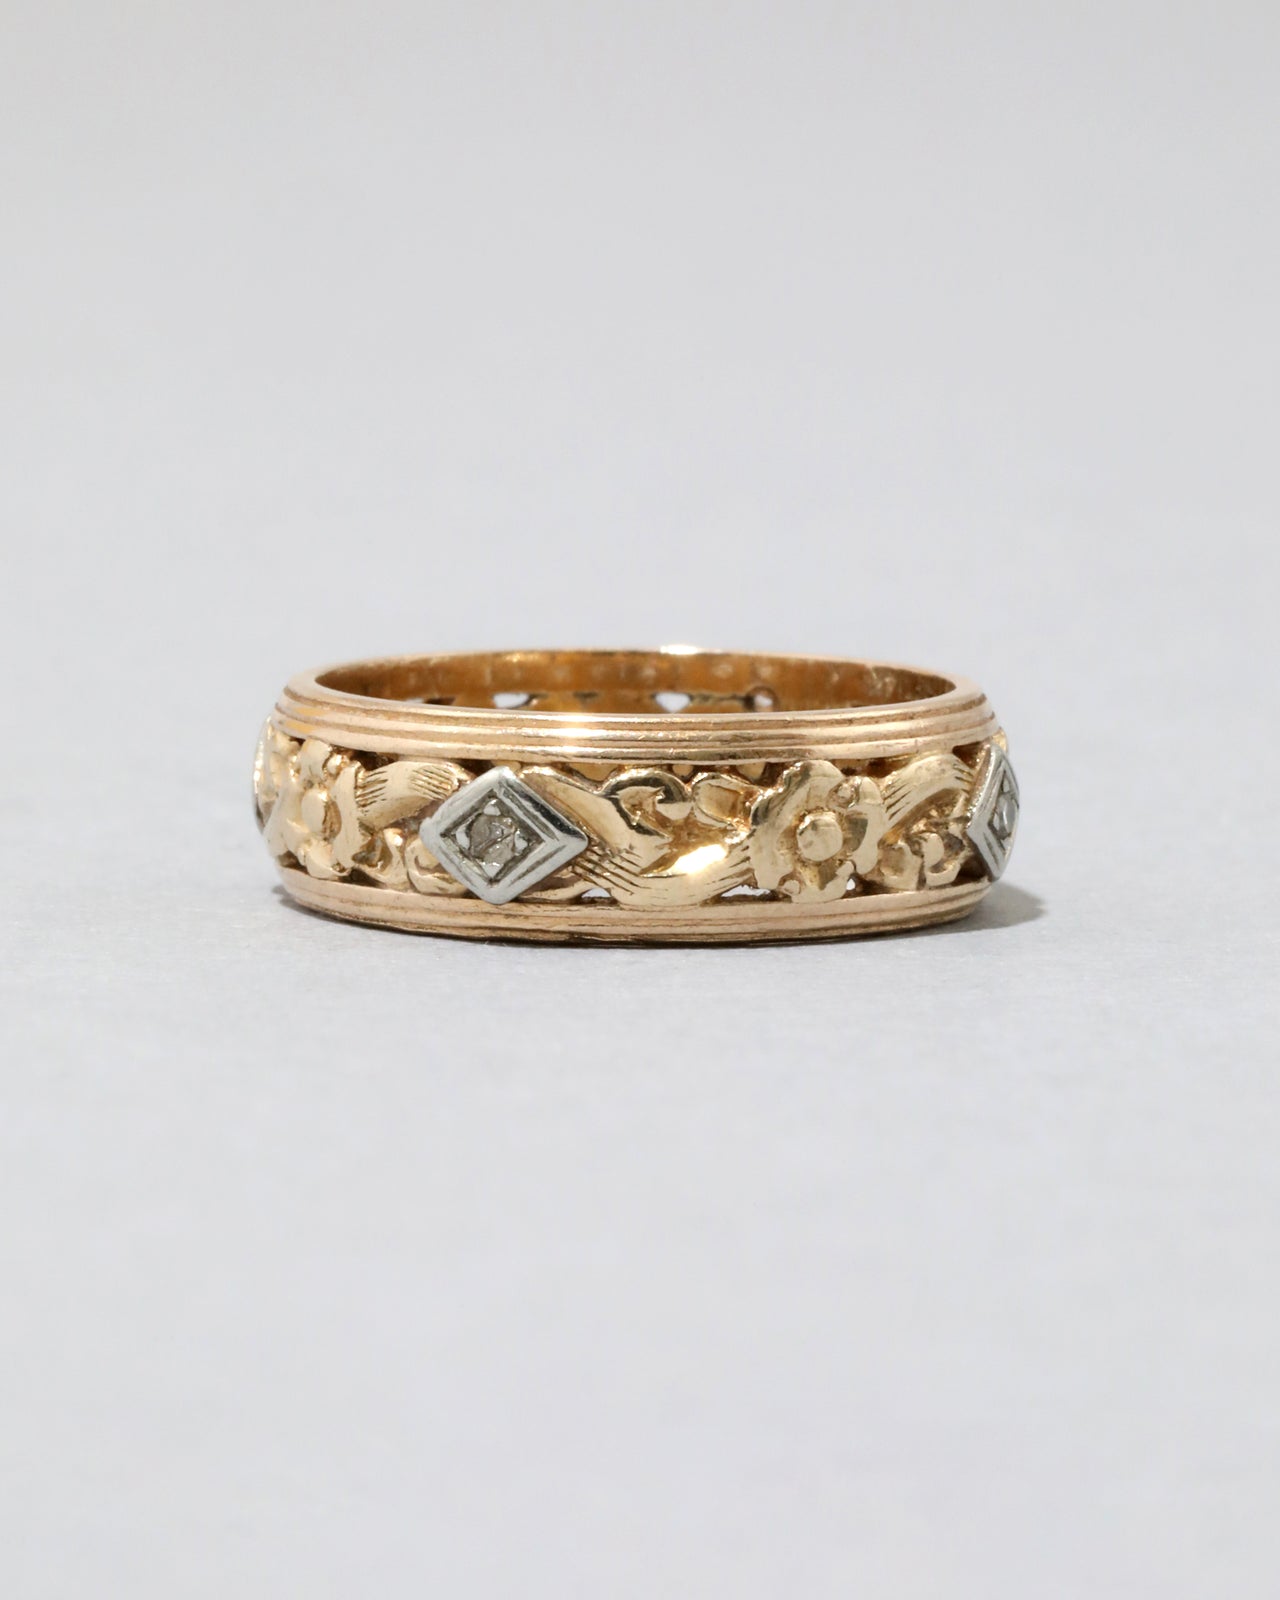 Antique 1920s 14k Gold & Diamond Floral Band Ring - Photo 2